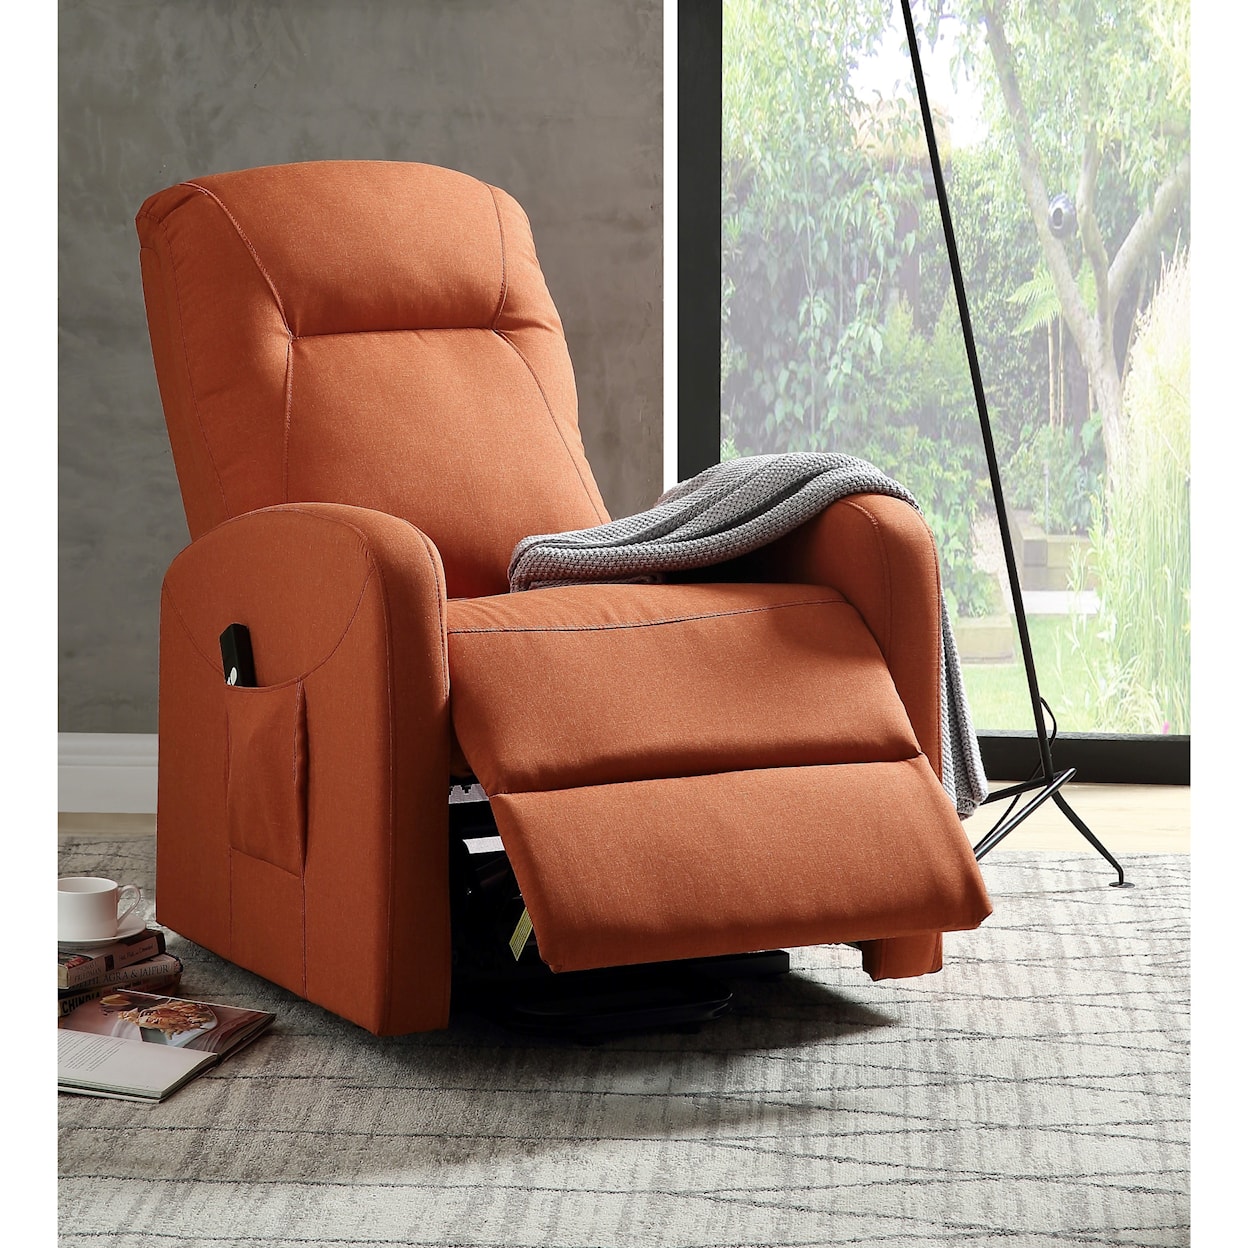 Acme Furniture Kasia Recliner with Power Lift